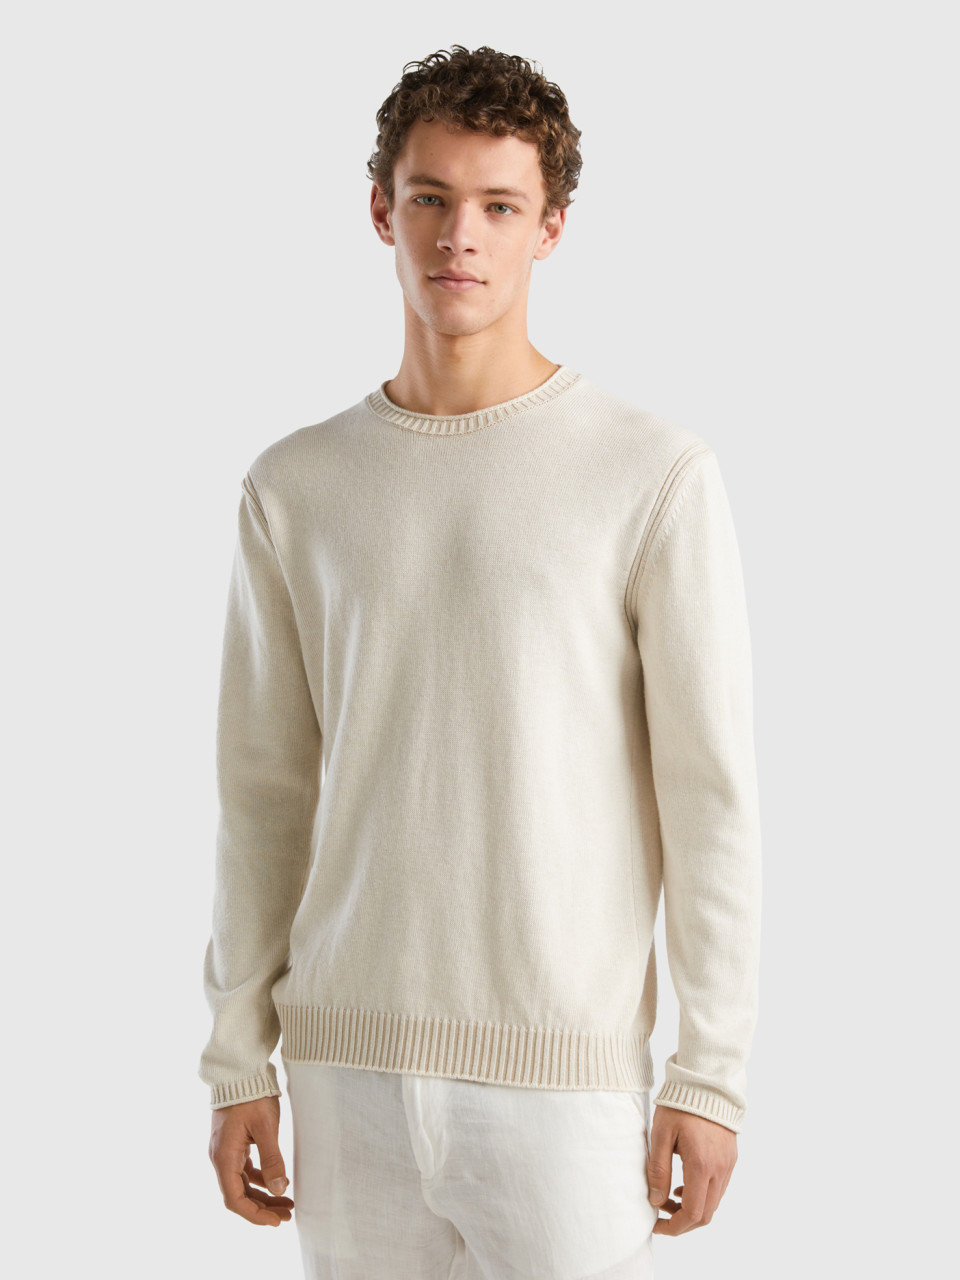 Benetton, Sweater In Recycled Cotton Blend, Creamy White, Men